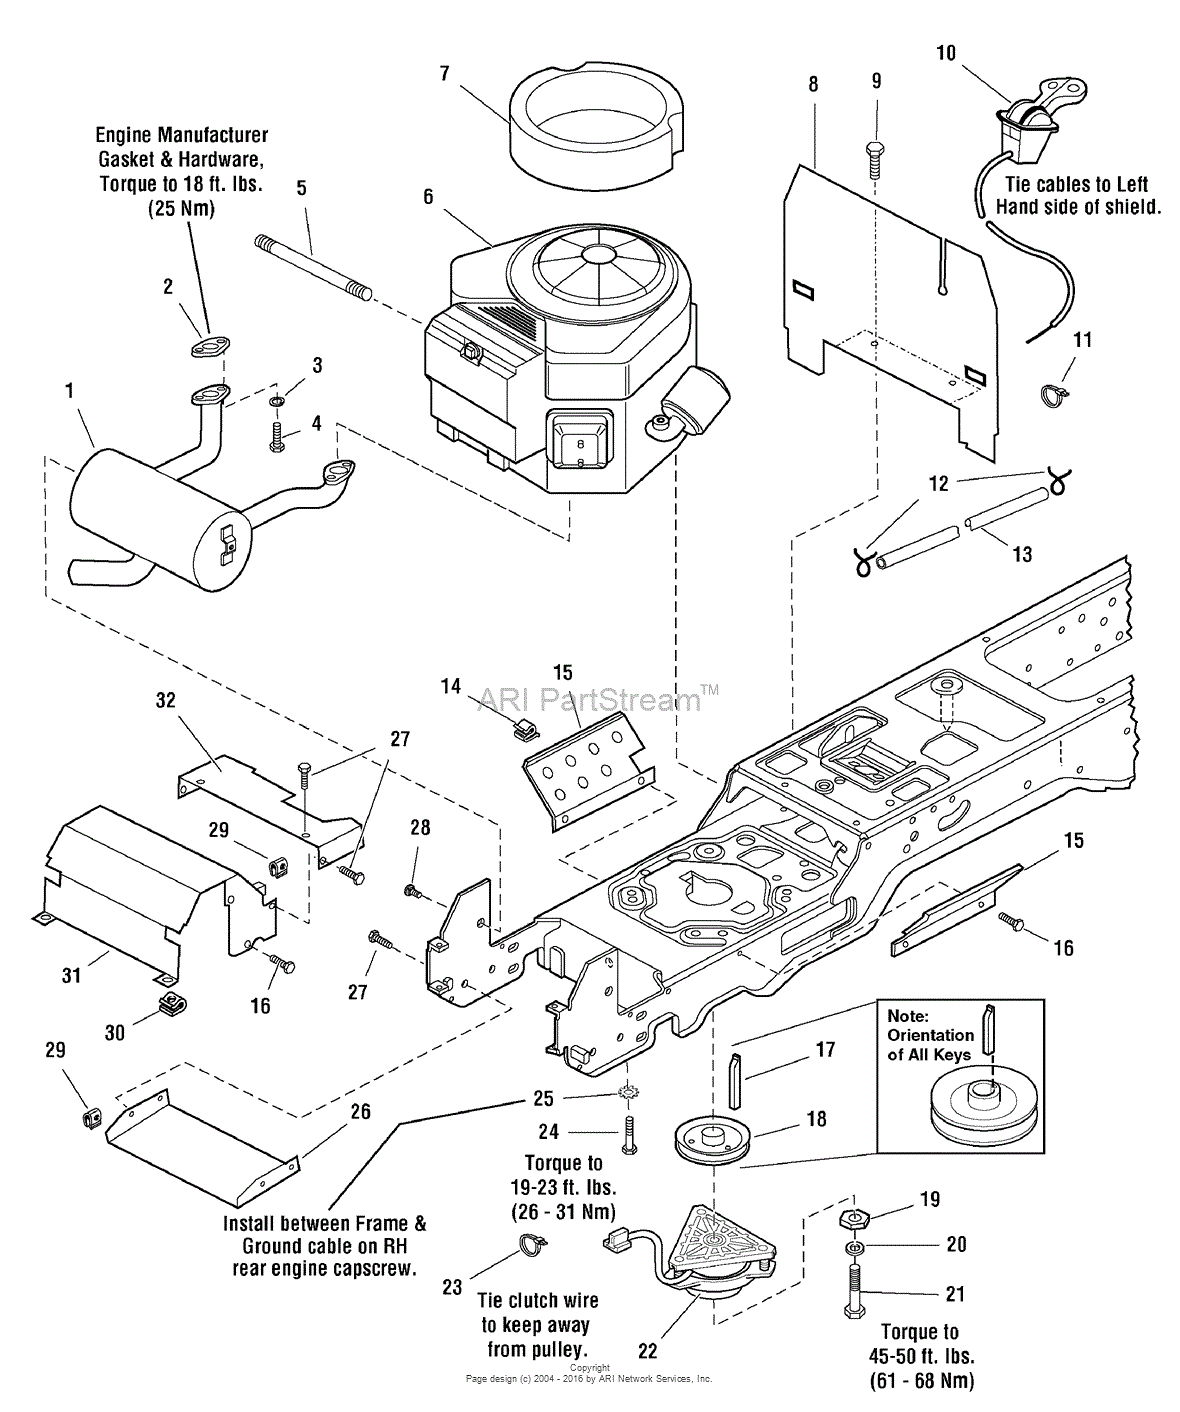 Parts Diagram For Engine Group